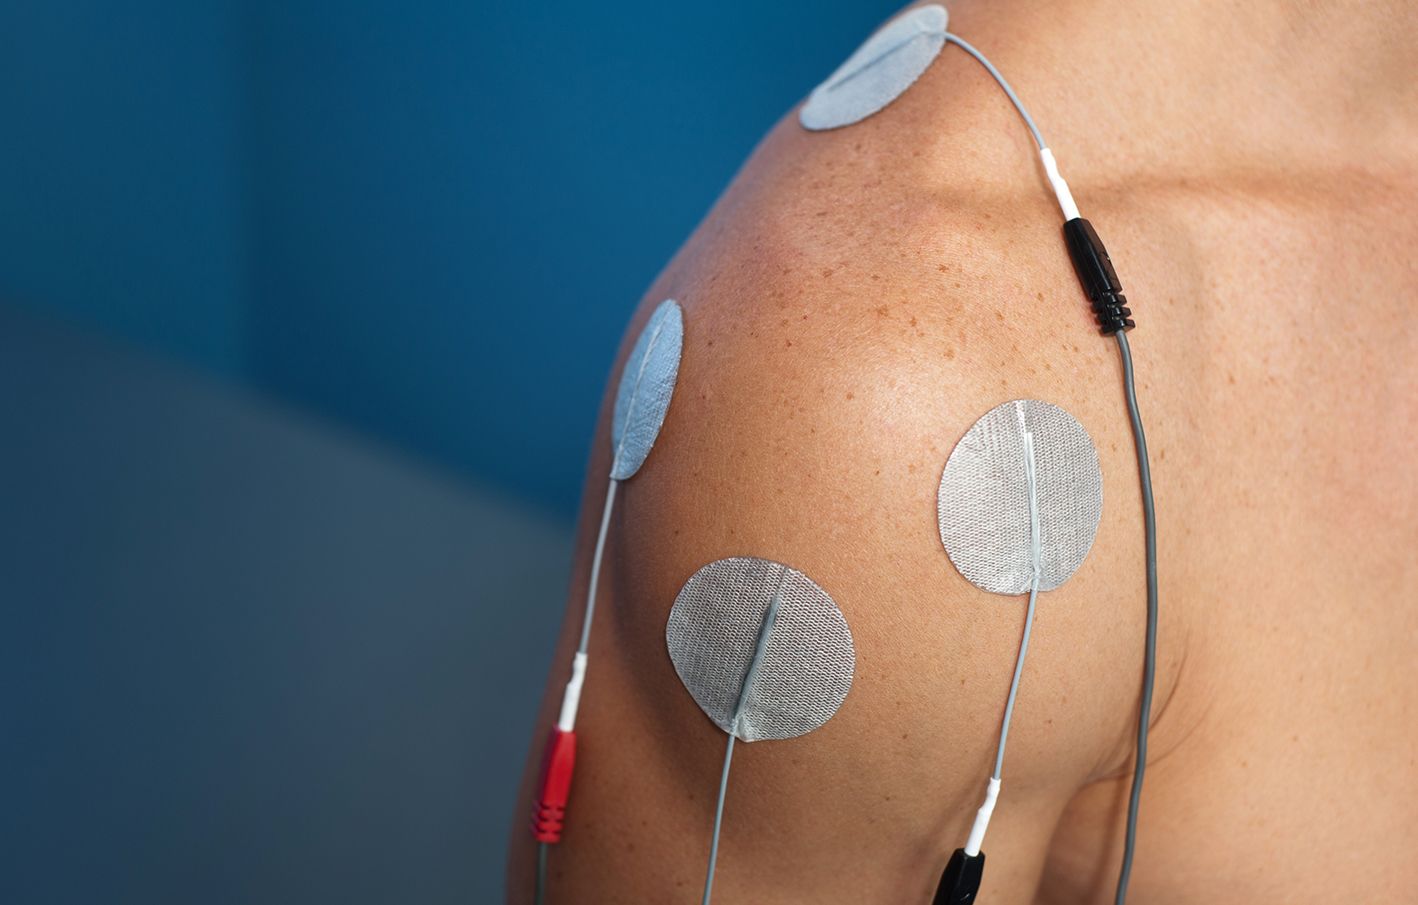 Interferential Electrical Muscle Stimulation